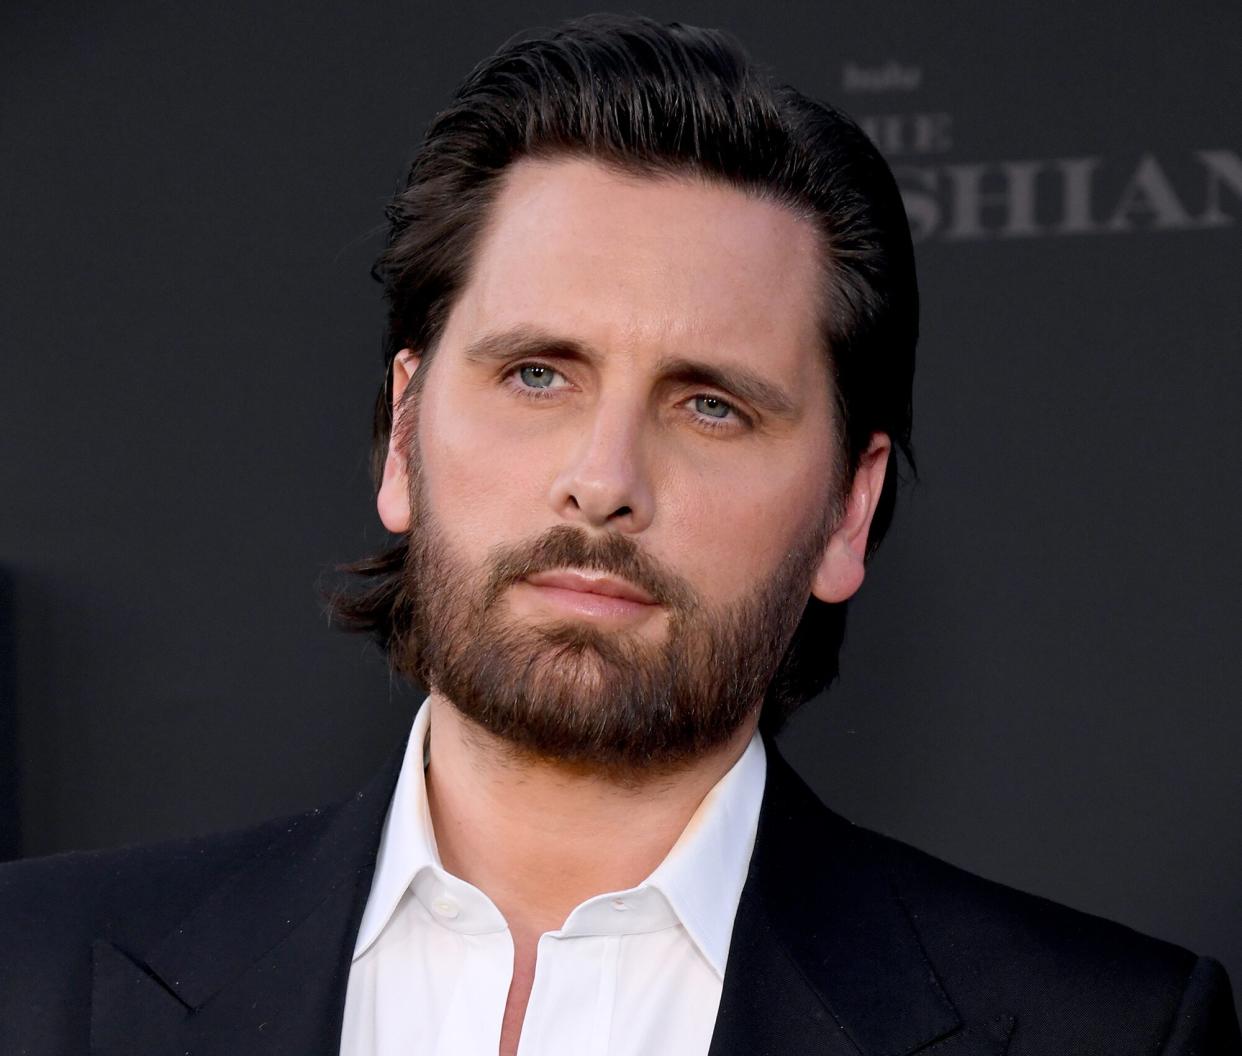 Scott Disick attends the Los Angeles premiere of Hulu's new show "The Kardashians" at Goya Studios on April 07, 2022 in Los Angeles, California